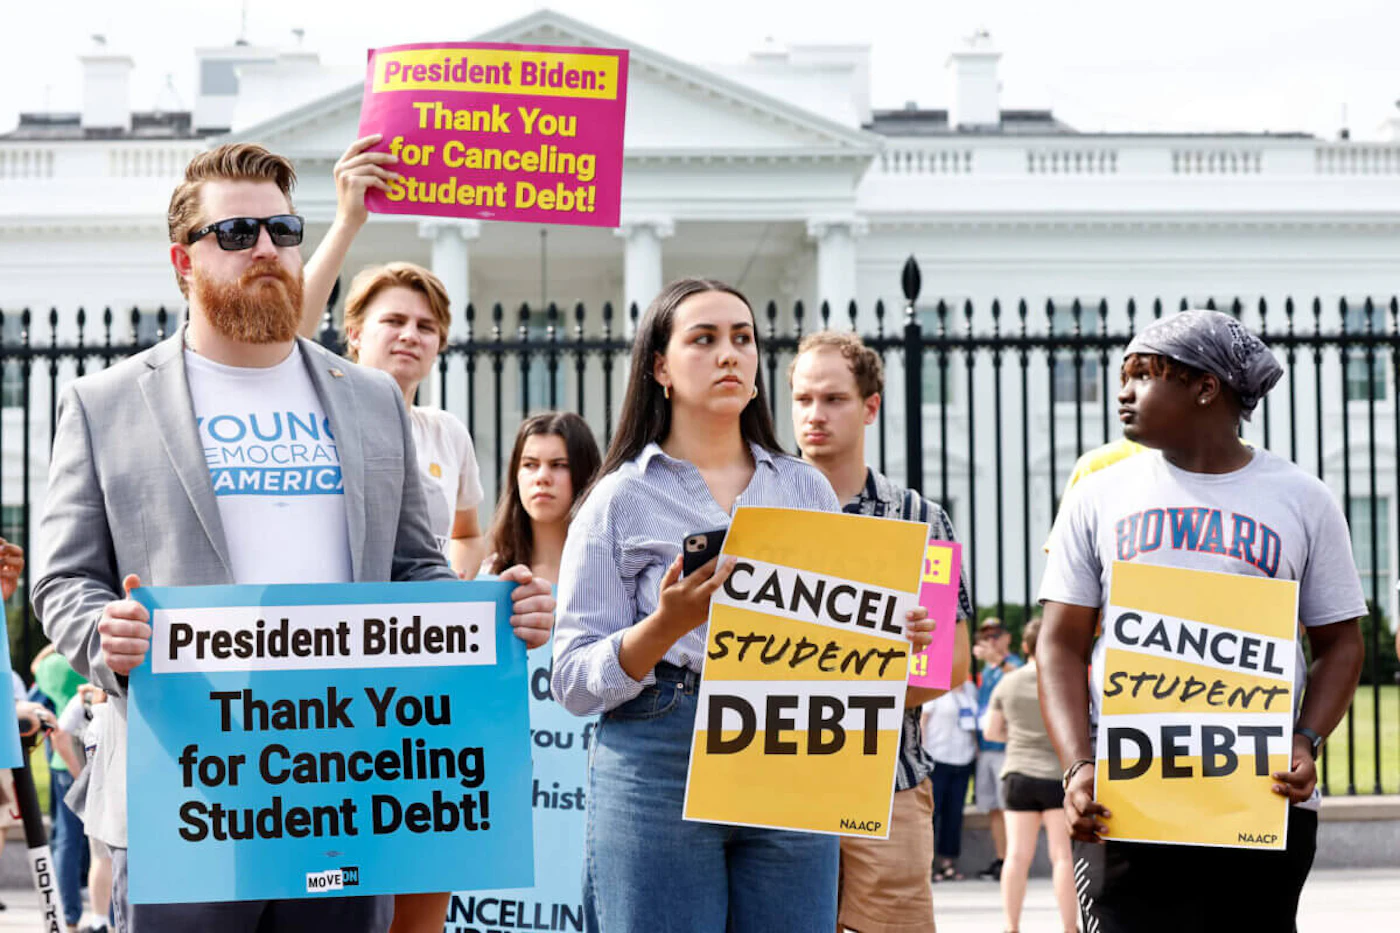 WASHINGTON, DC - AUGUST 25: Student loan borrowers stage a rally in front of The White House to celebrate President Biden cancelling student debt and to begin the fight to cancel any remaining debt on August 25, 2022 in Washington, DC. (Photo by Paul Morigi/Getty Images for We the 45m)